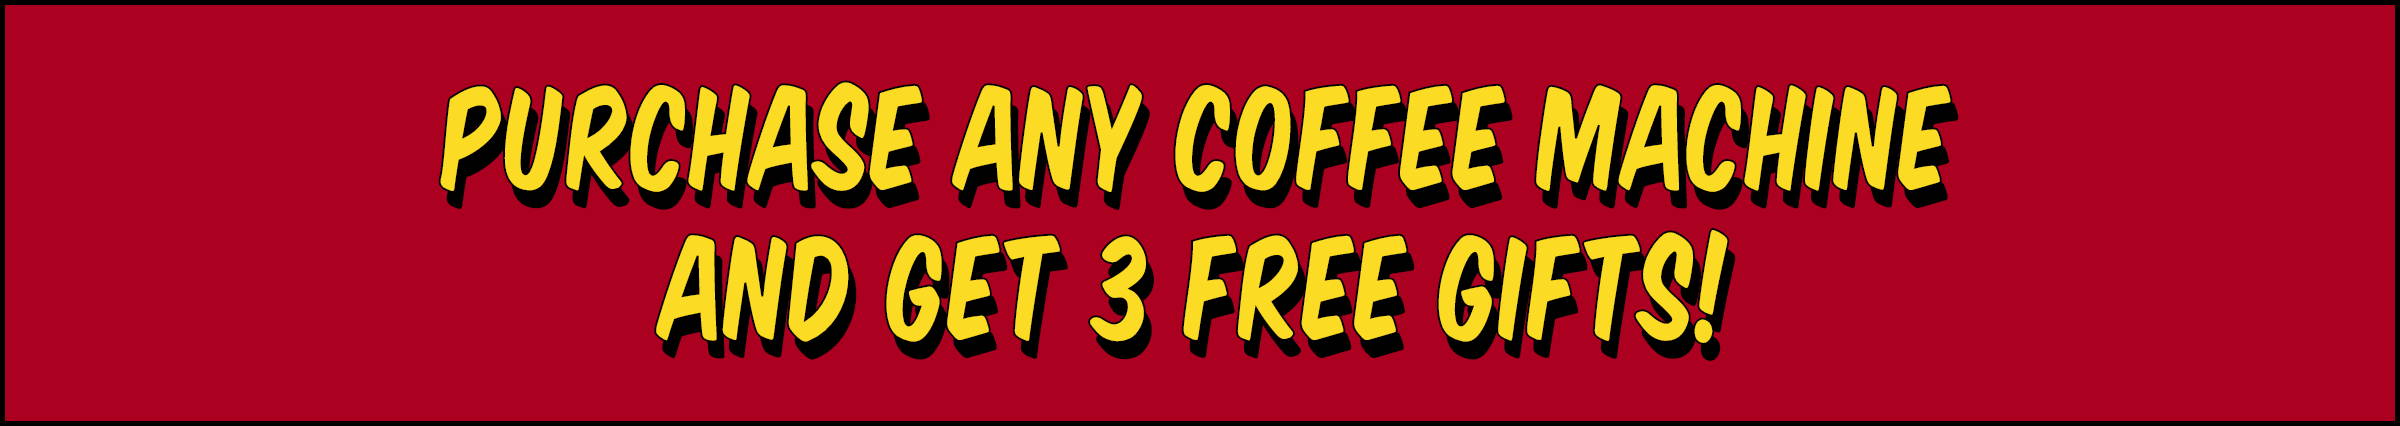 Purchase Any Coffee Machine And Get 3 Free Gifts! 